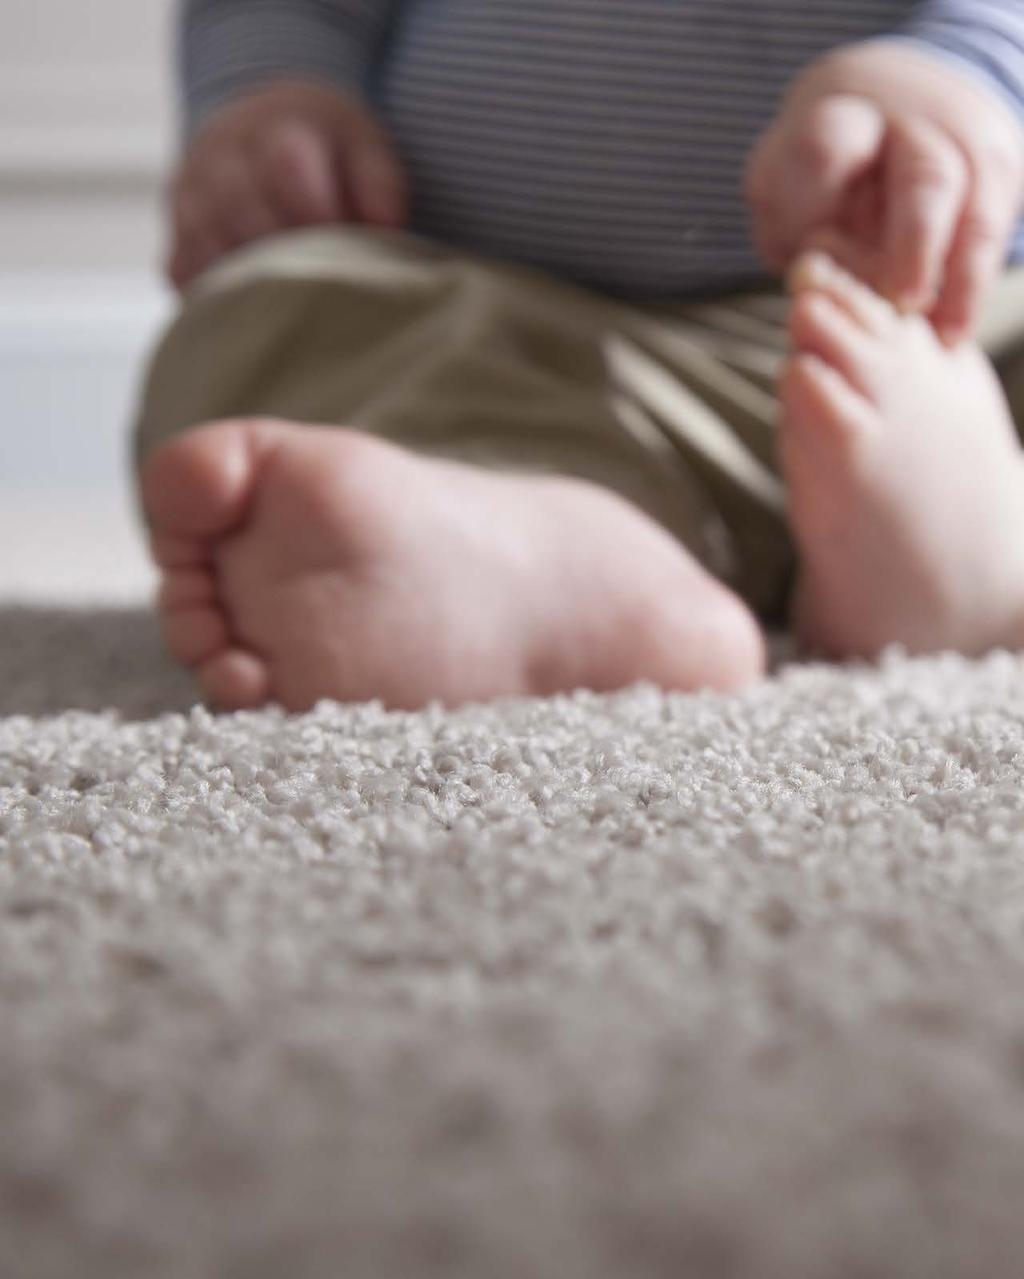 The truth about stain protection SmartStrand Forever Clean is the ONLY carpet that contains permanent, built-in stain and soil protection that never washes or wears off.